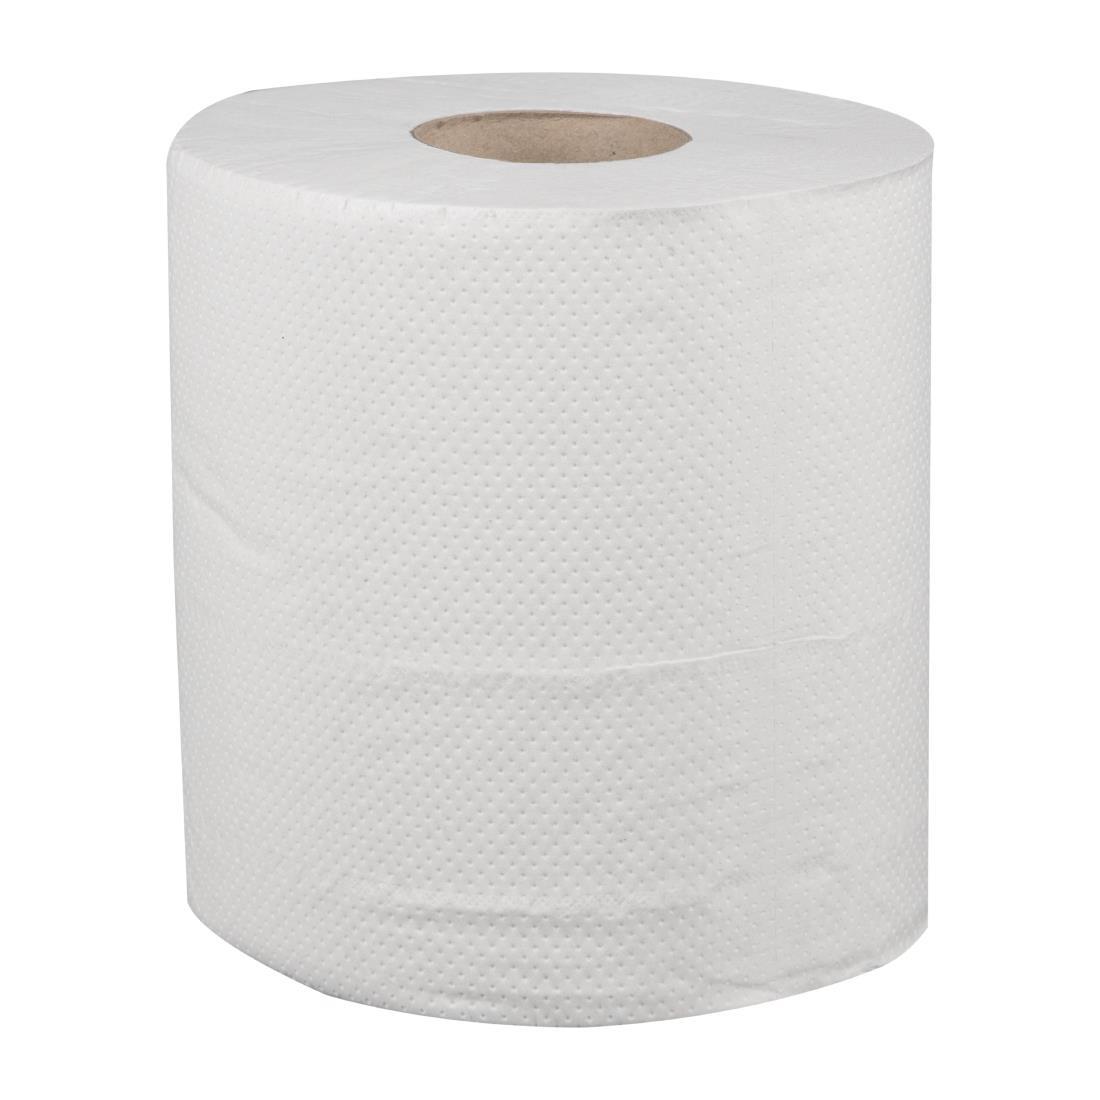 - DL920 Pack of 6 Jantex Centrefeed White Rolls 2ply 